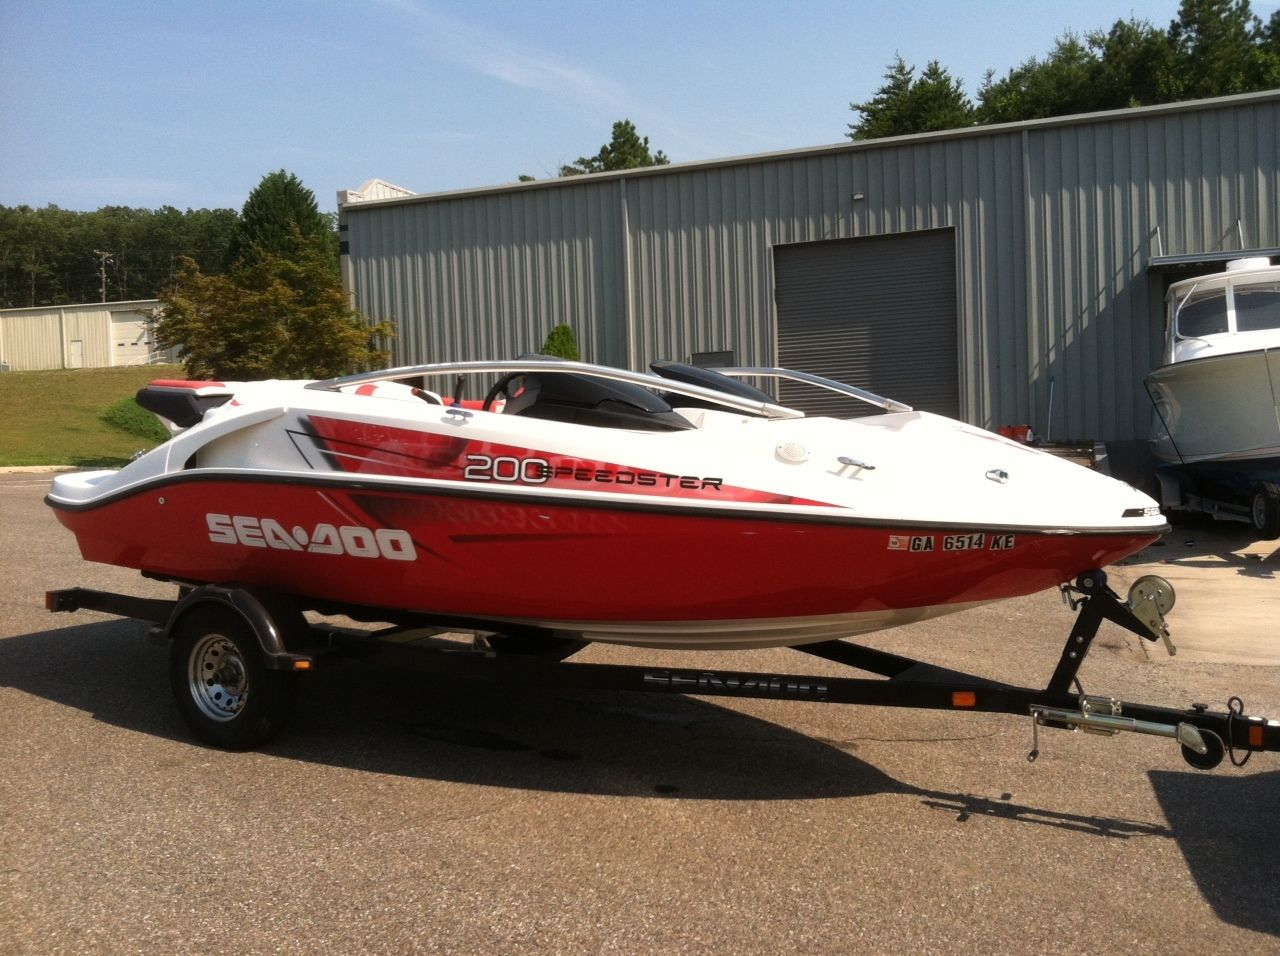 Sea Doo Speedster 200 2007 for sale for $16,250 - Boats 